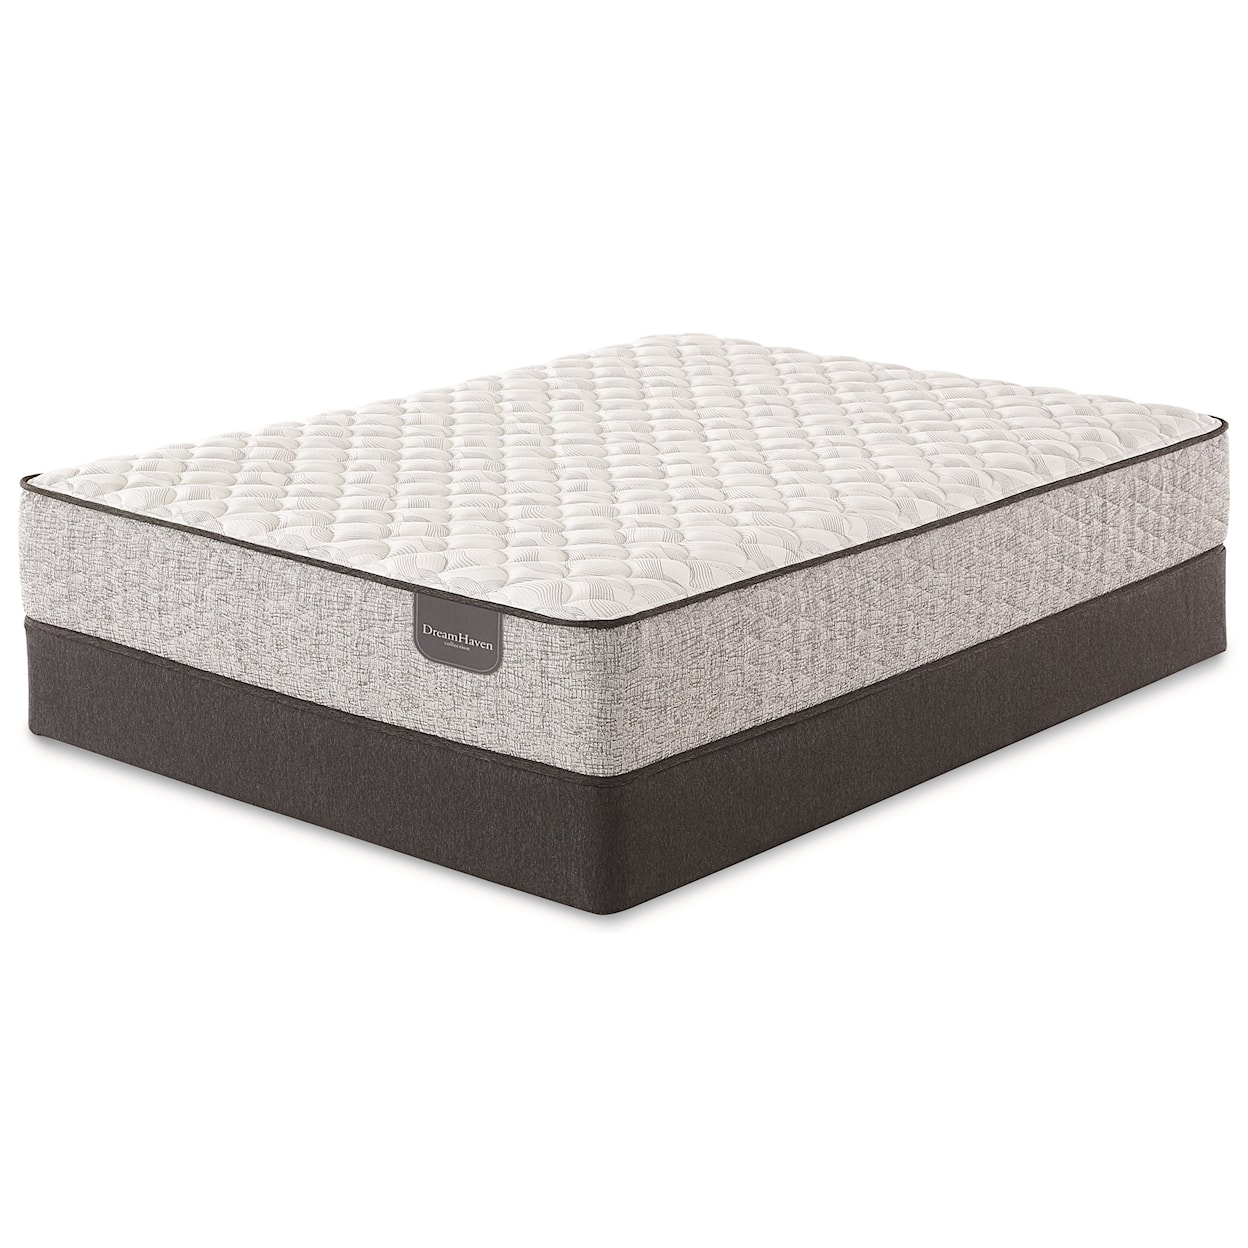 Serta Crystal Downs Firm King Pocketed Coil Mattress Set